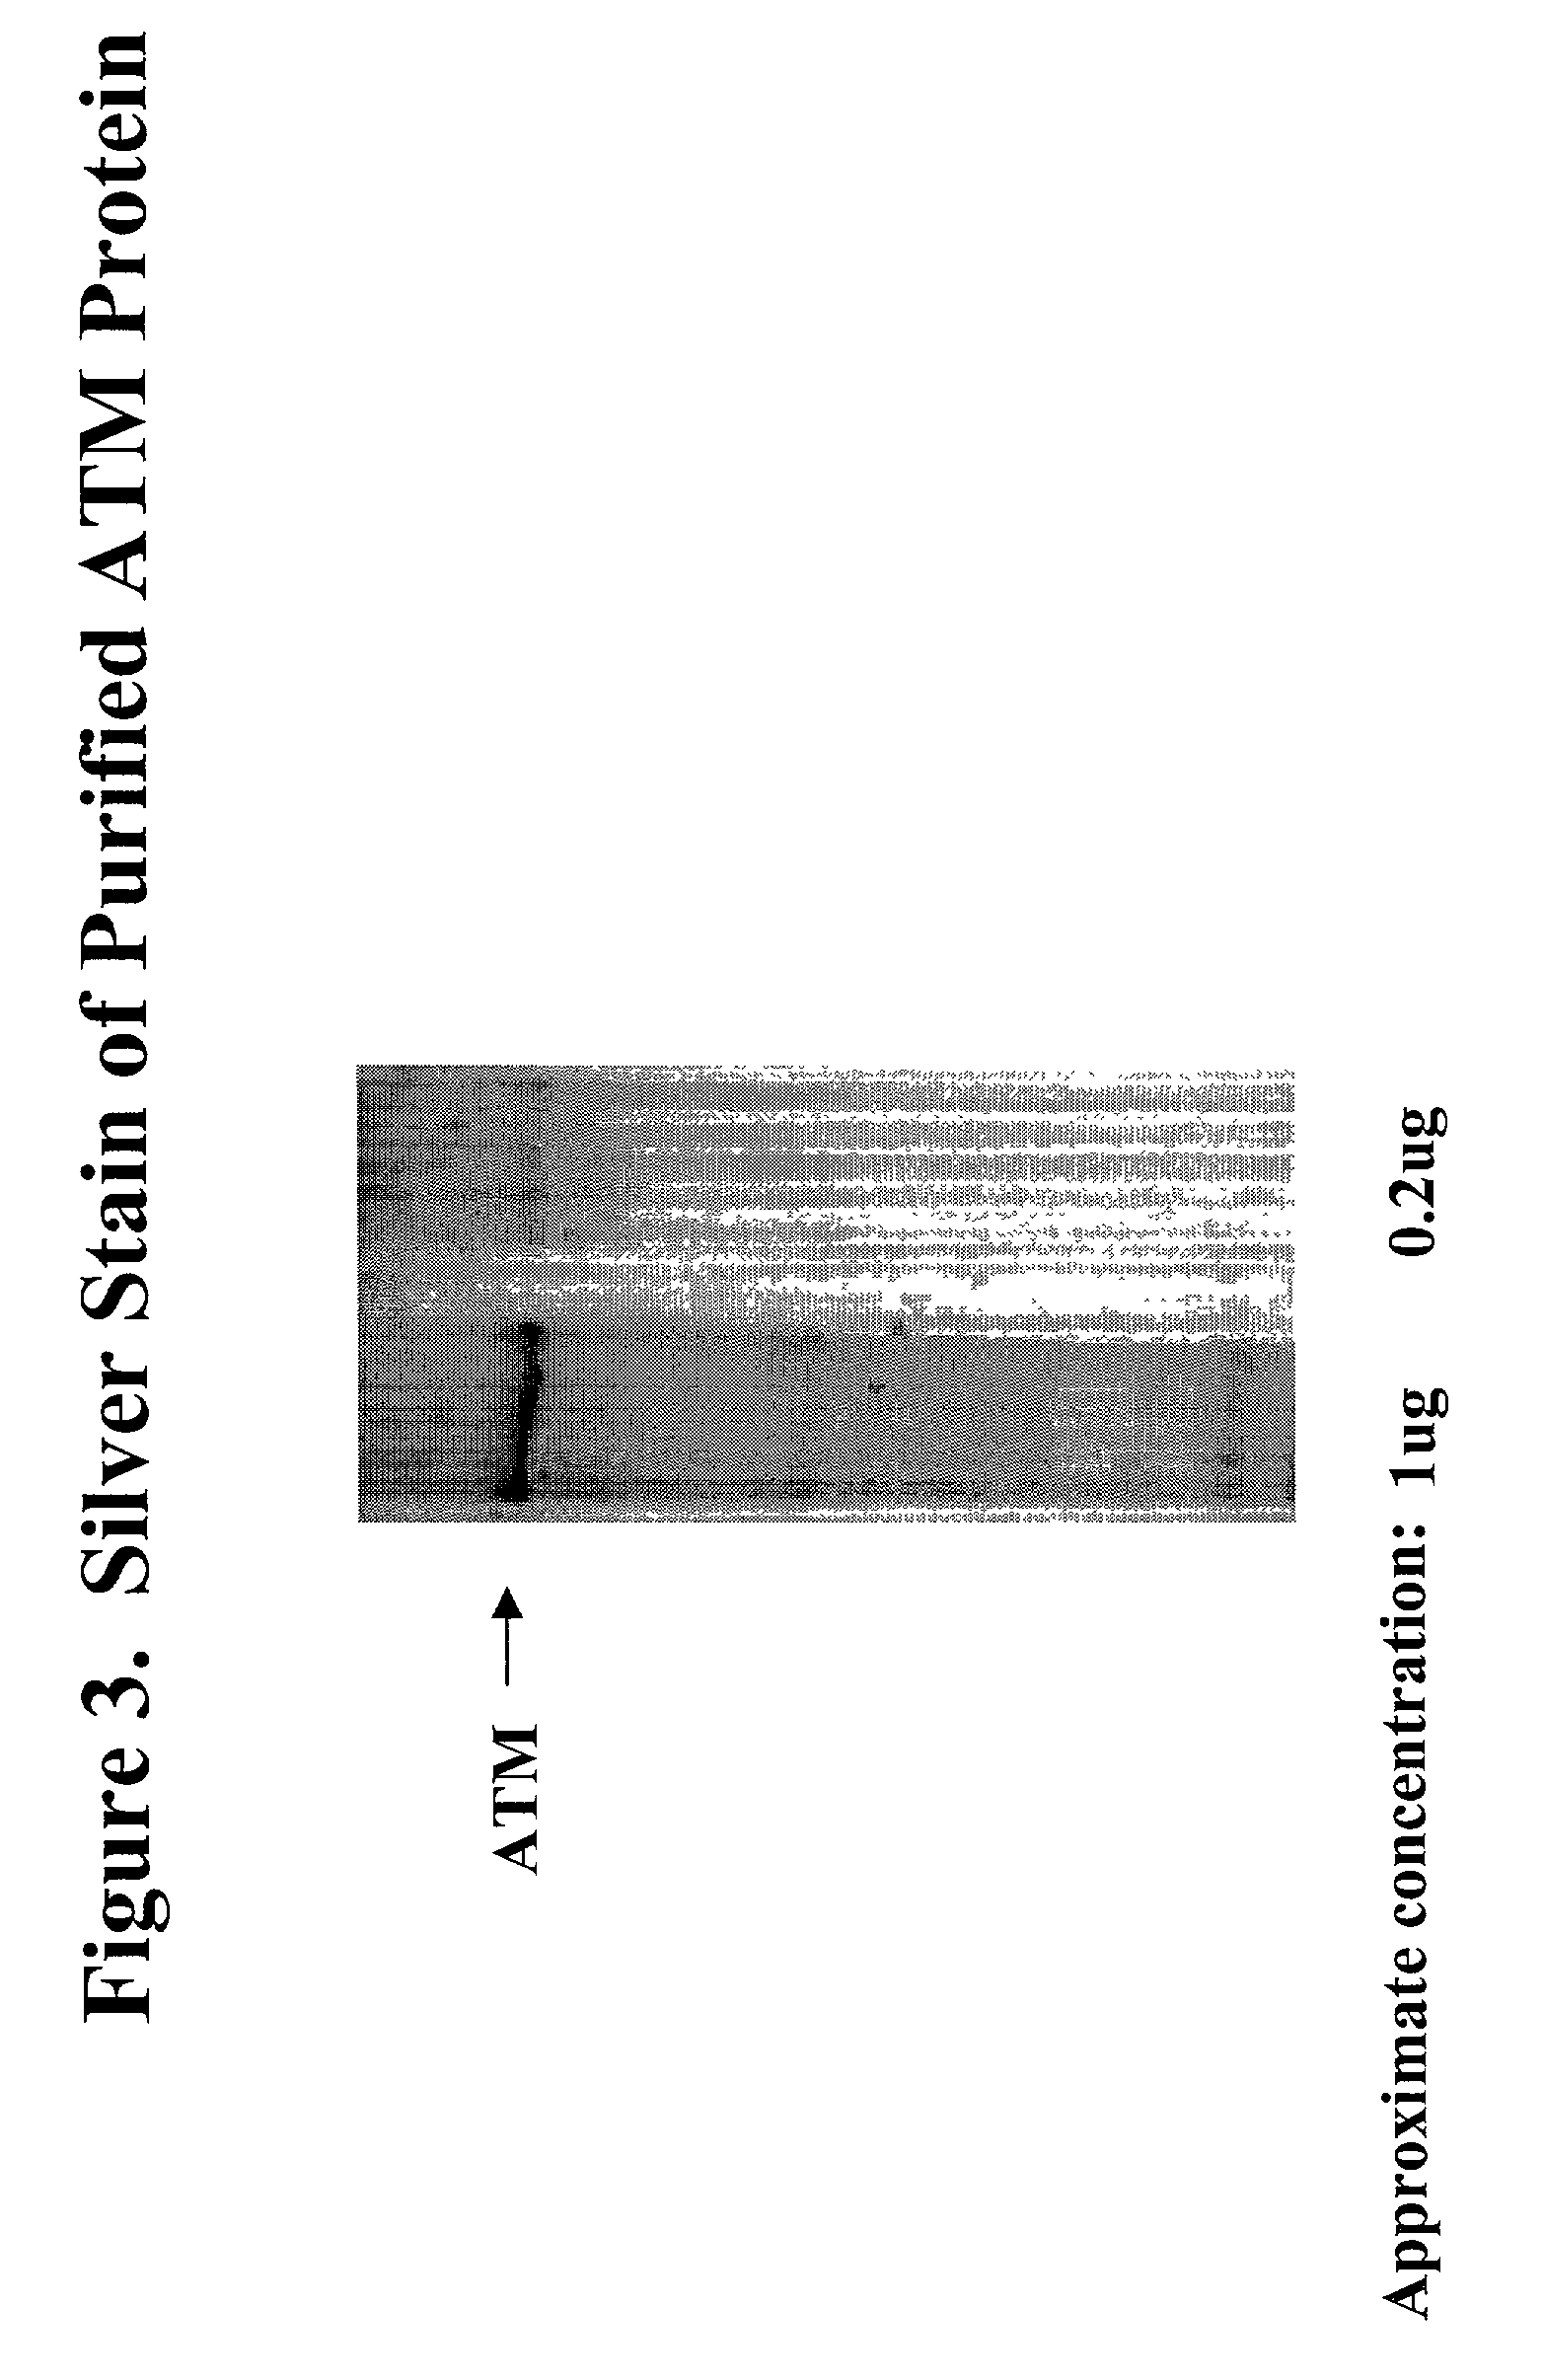 Expression and purification of ATM protein using vaccinia virus